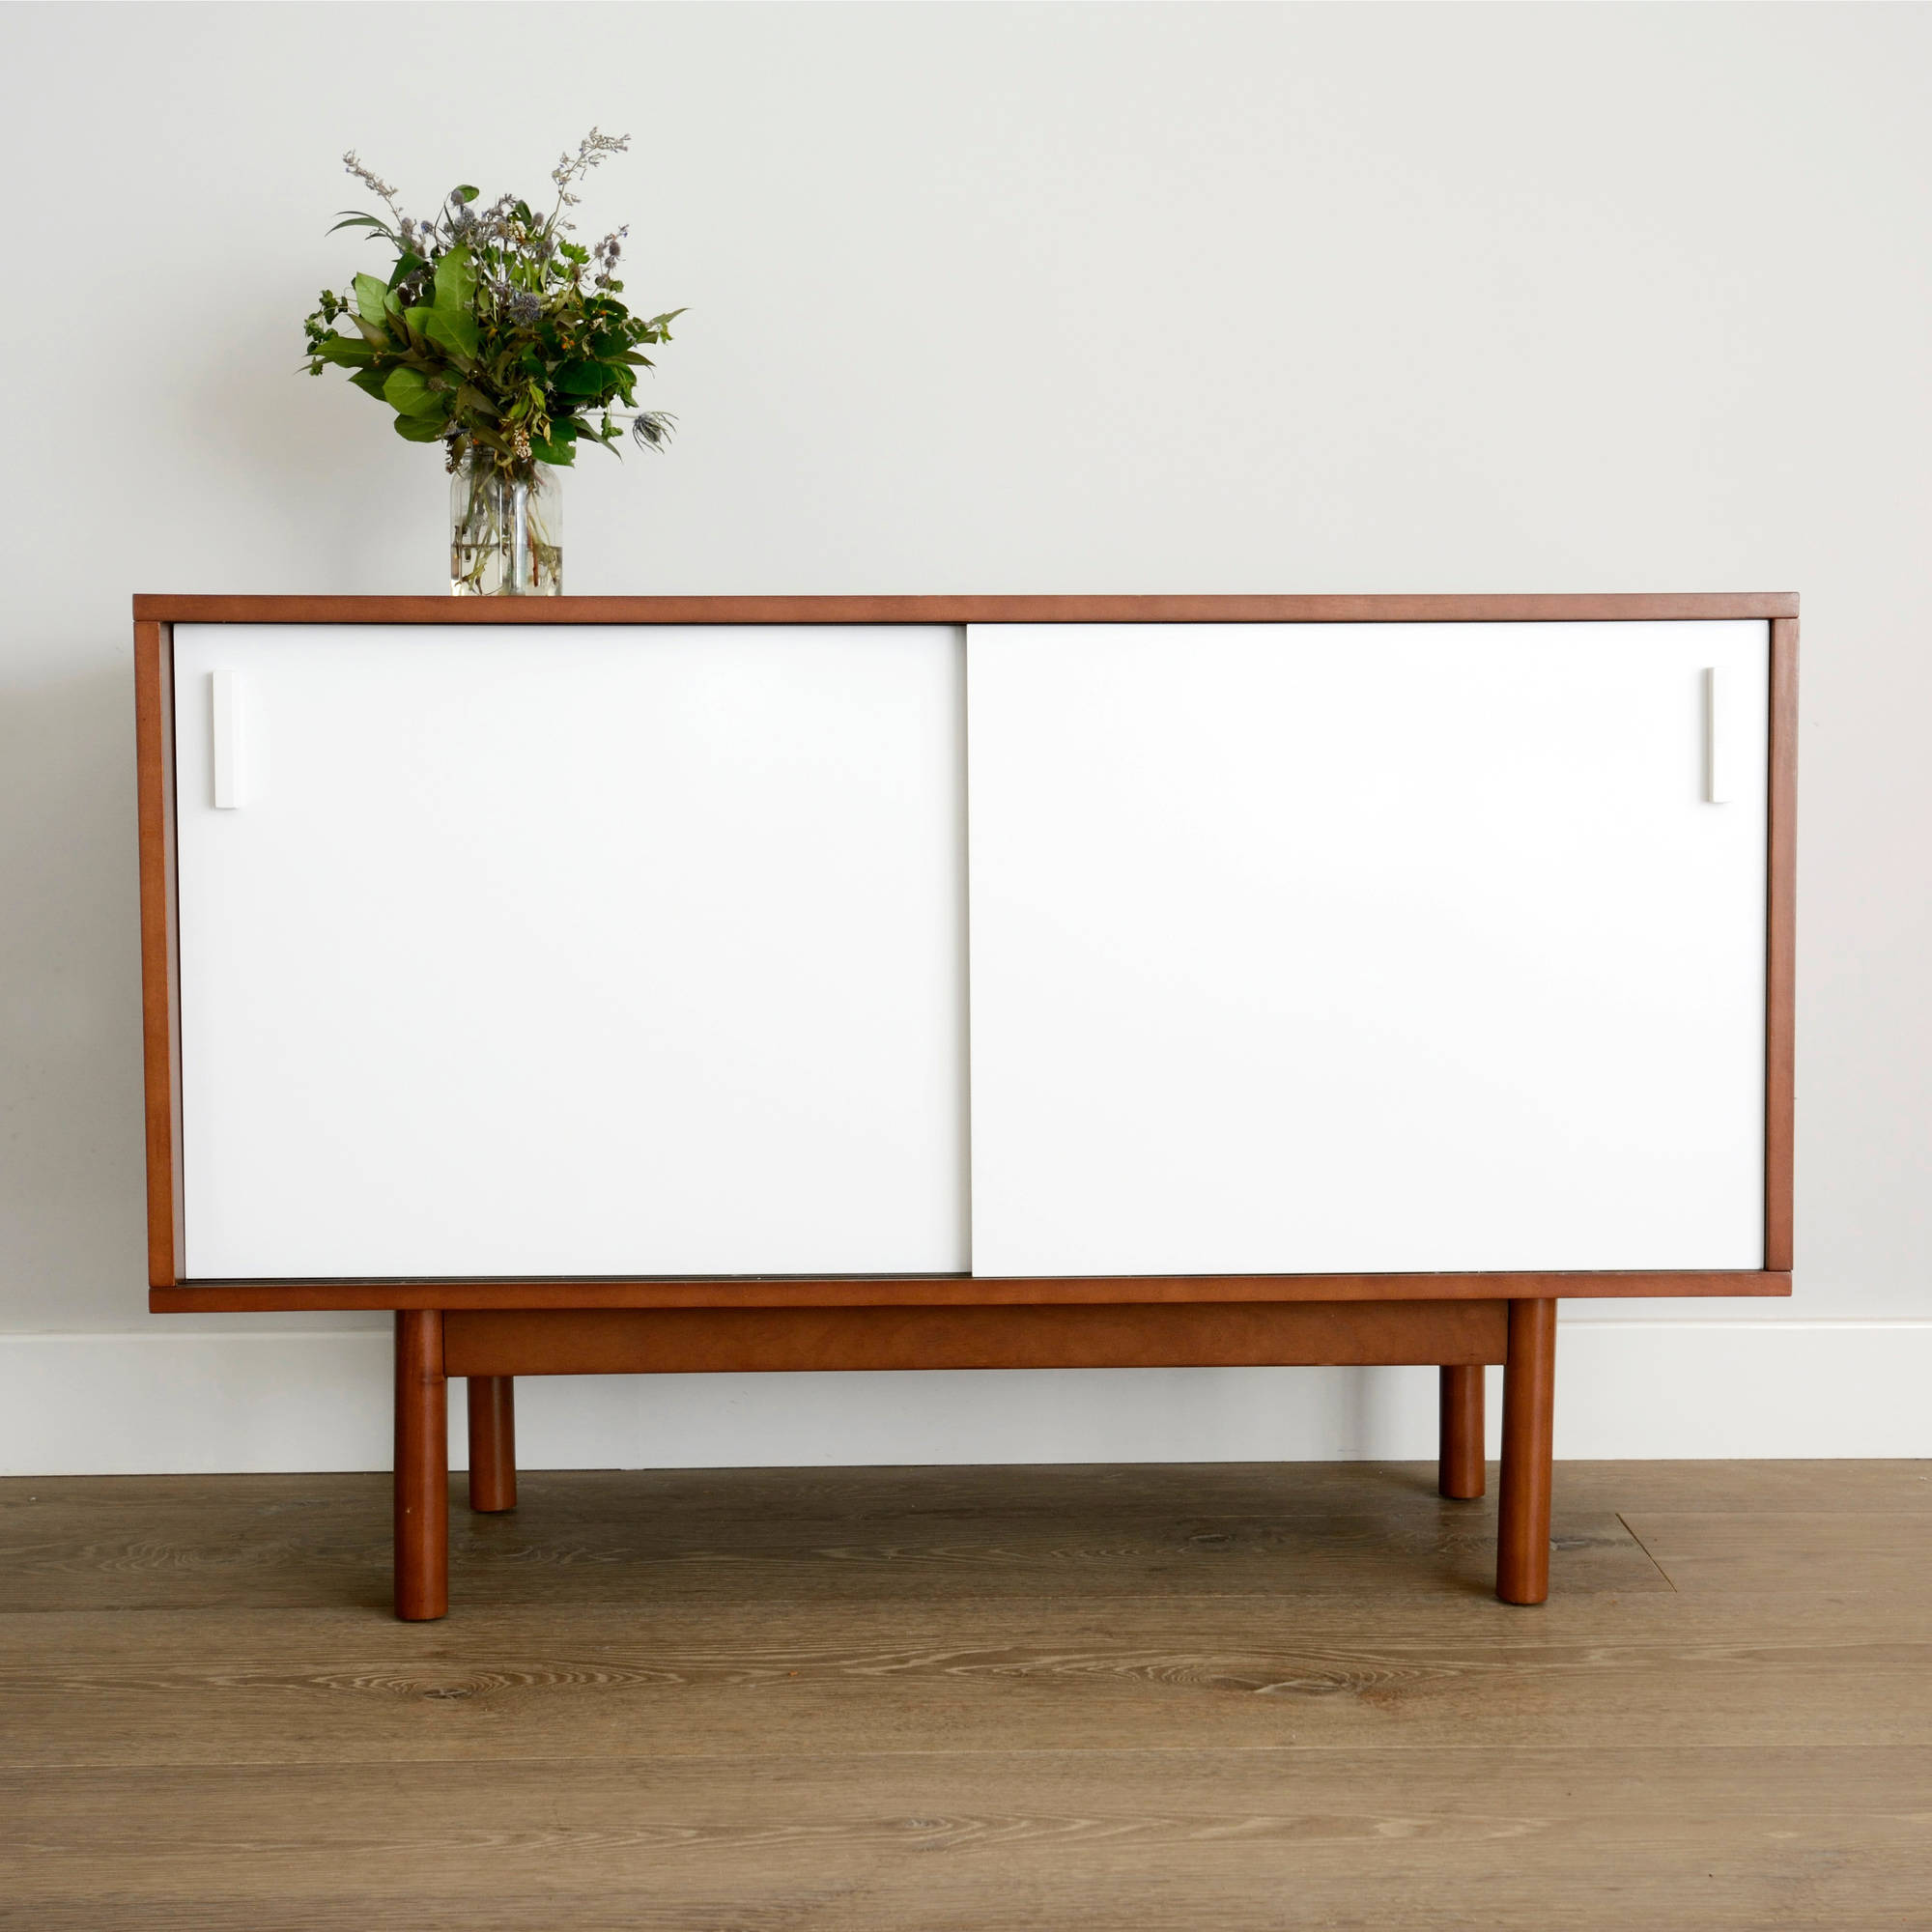 Better Homes & Garden Baxter Wood Credenza, White Finish - image 2 of 3